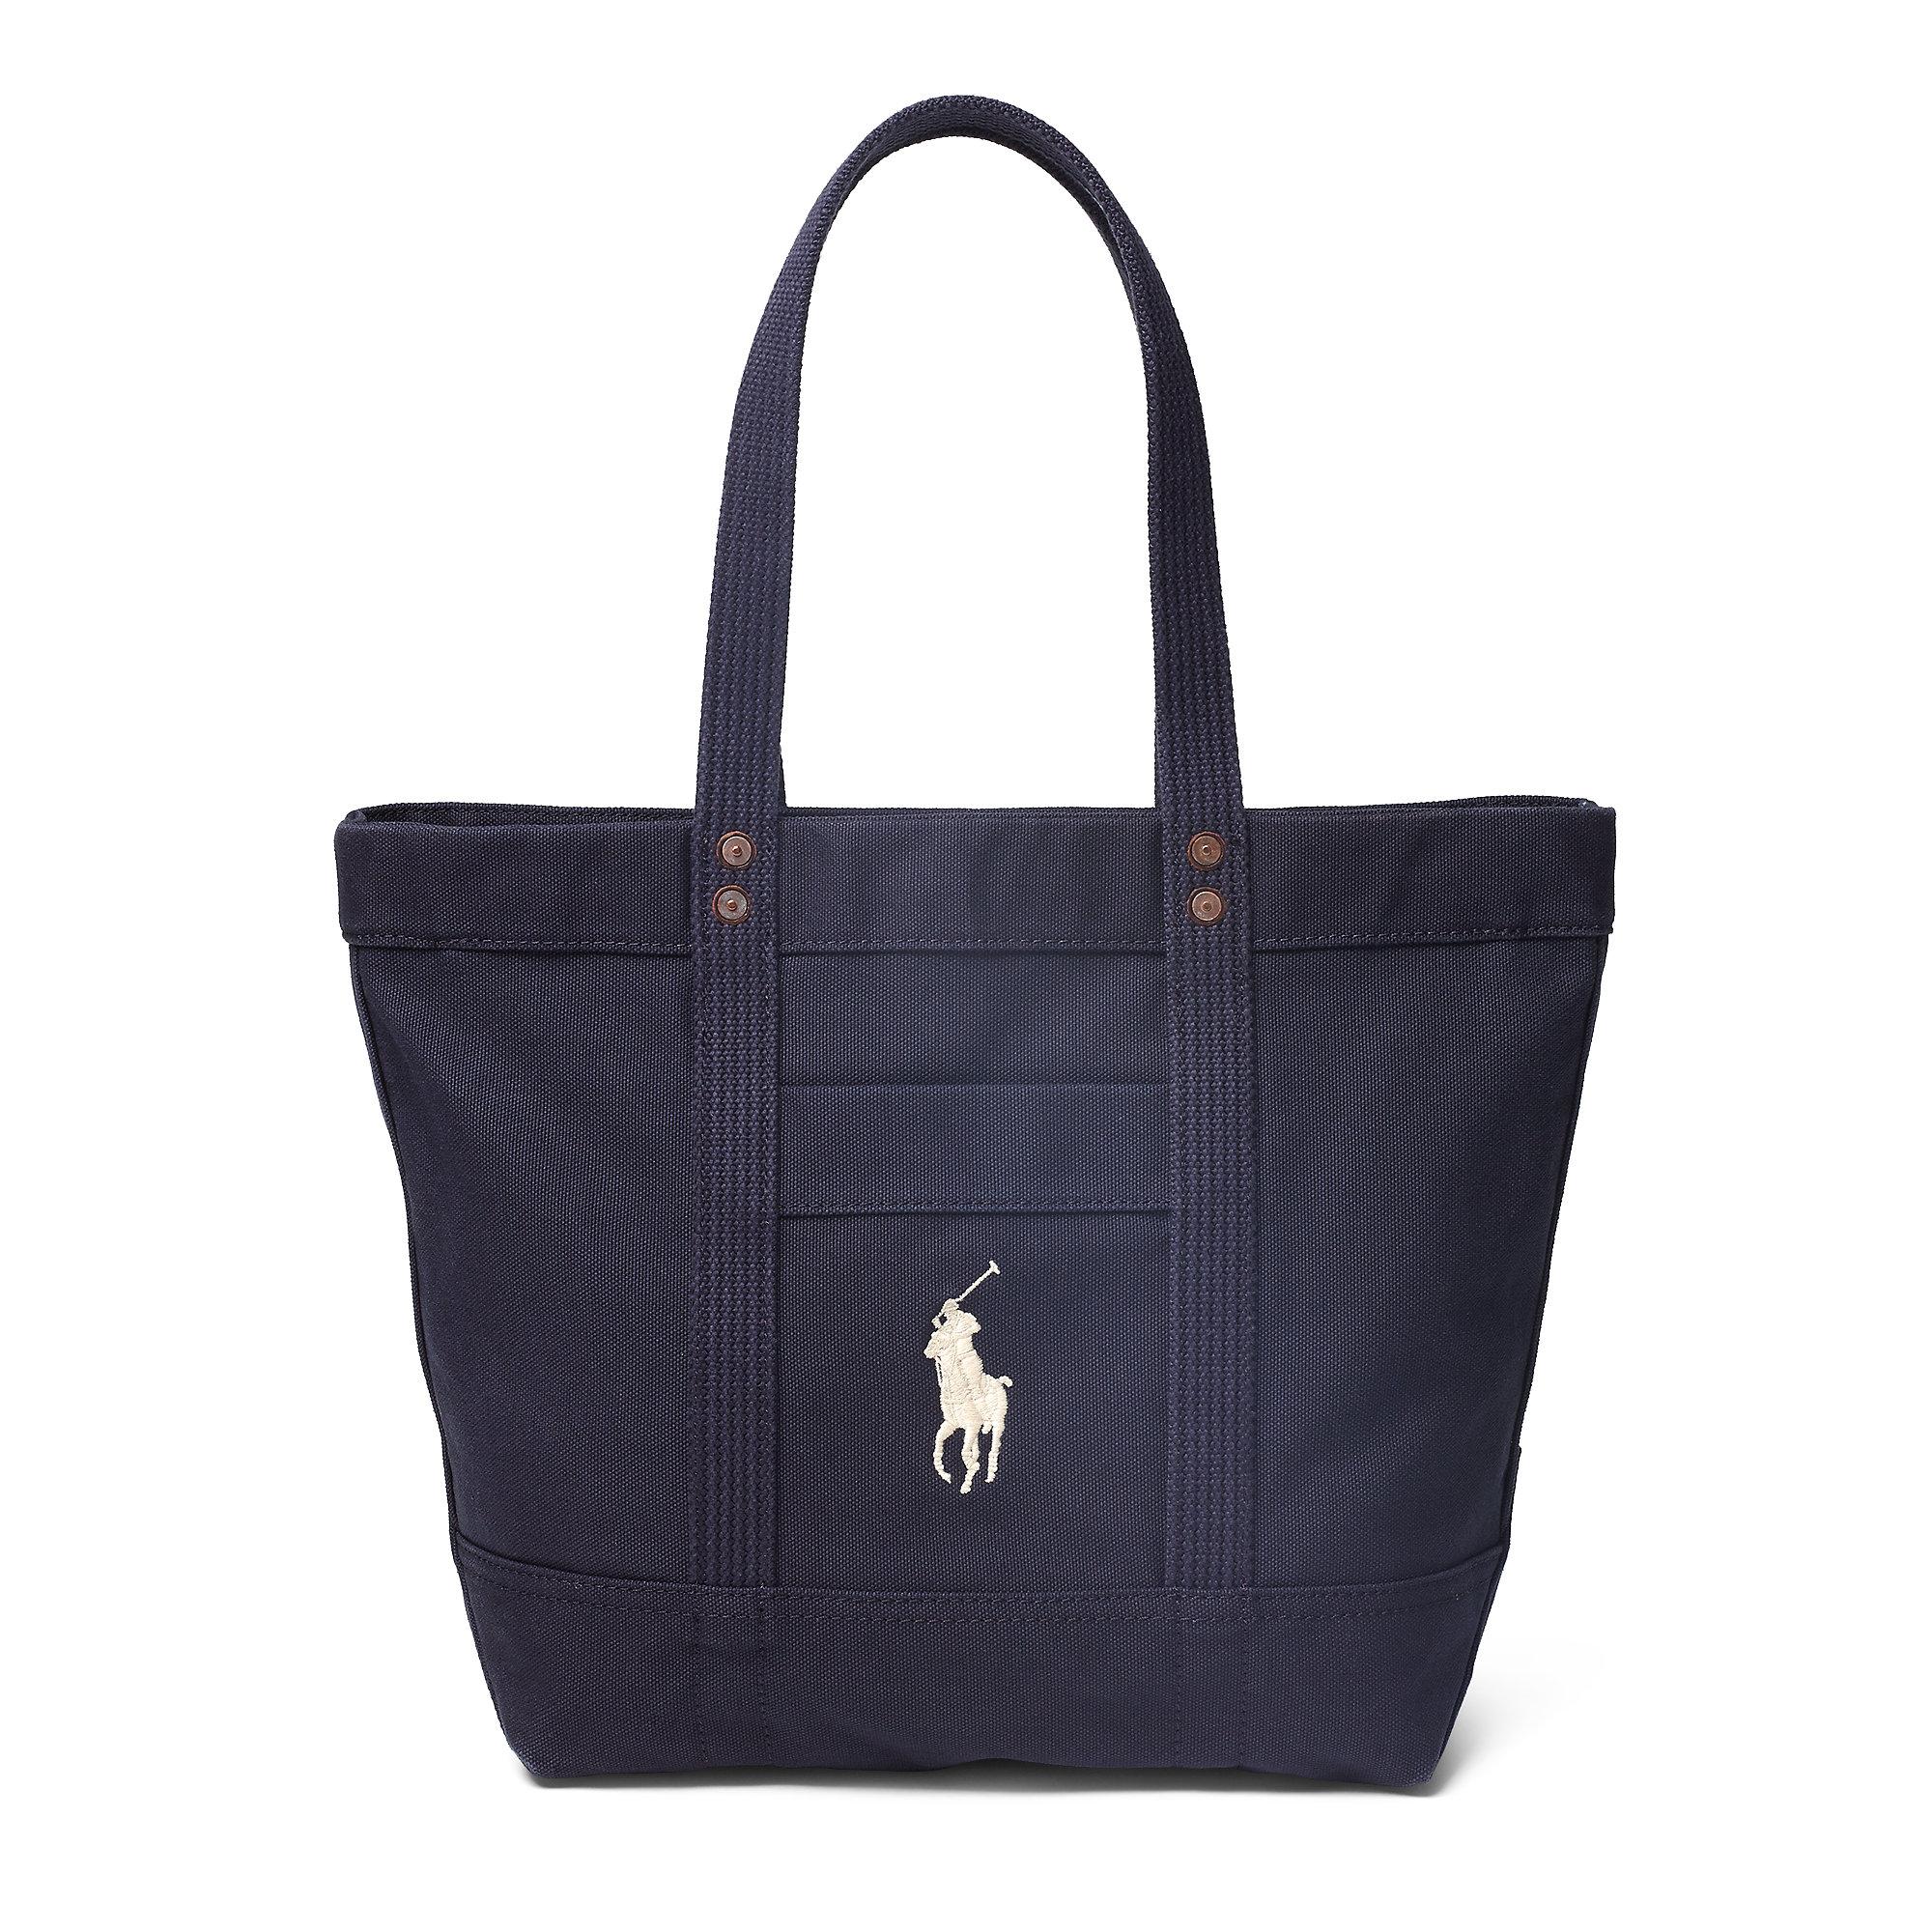 Lyst - Polo Ralph Lauren Canvas Big Pony Tote in Blue